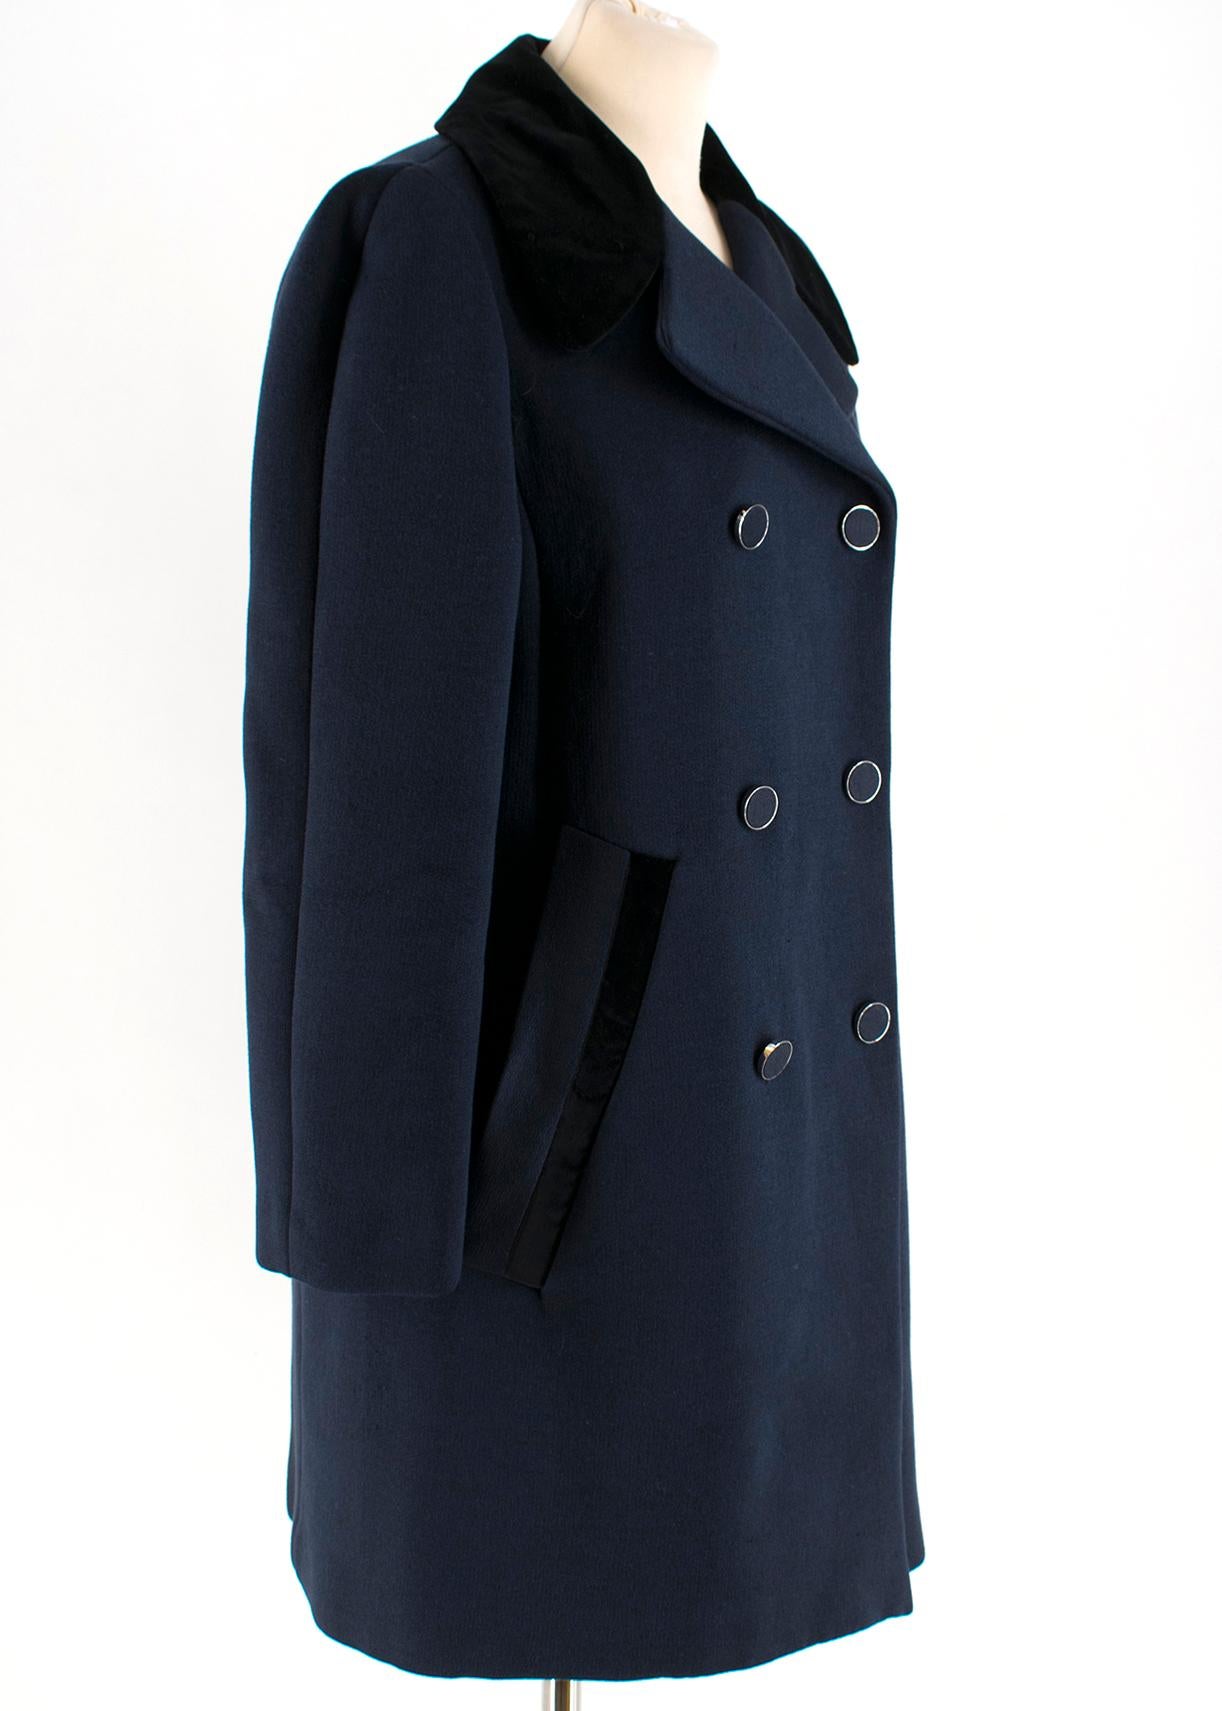 Louis Vuitton Double breasted Navy Coat 

Double breasted coat
Two tone detailing 
Black velvet collar 
Velvet pocket detailing 
Form fitting 
Silver hardware
Silver and blue button closure 
Snap Closure 
Lapel Collar
Two exterior slip